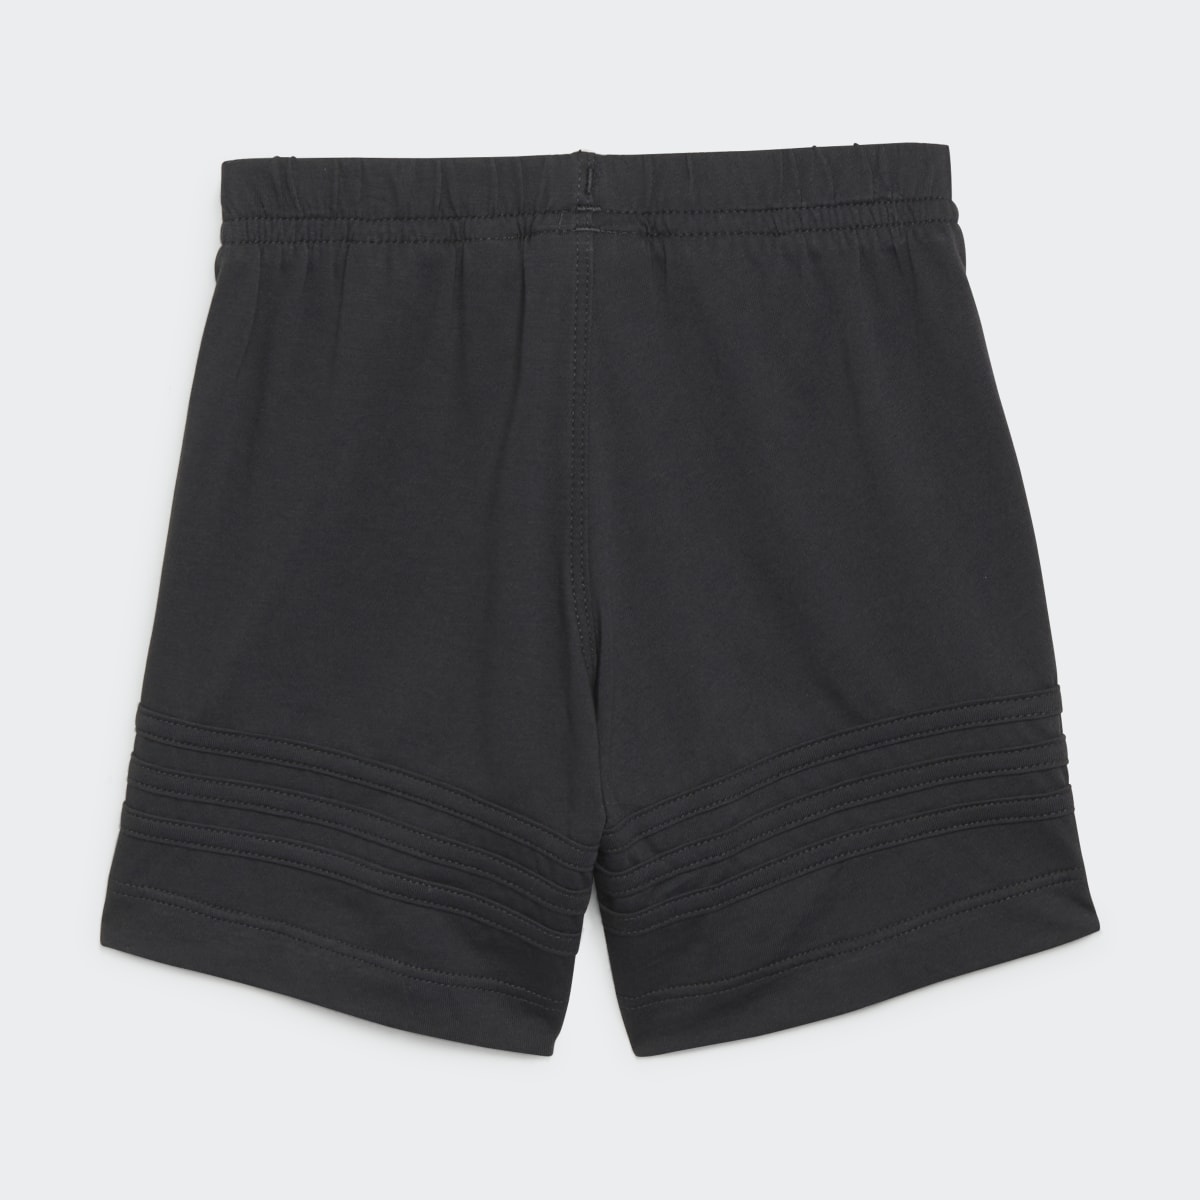 Adidas SPRT Collection Shorts and Tee Set. 6